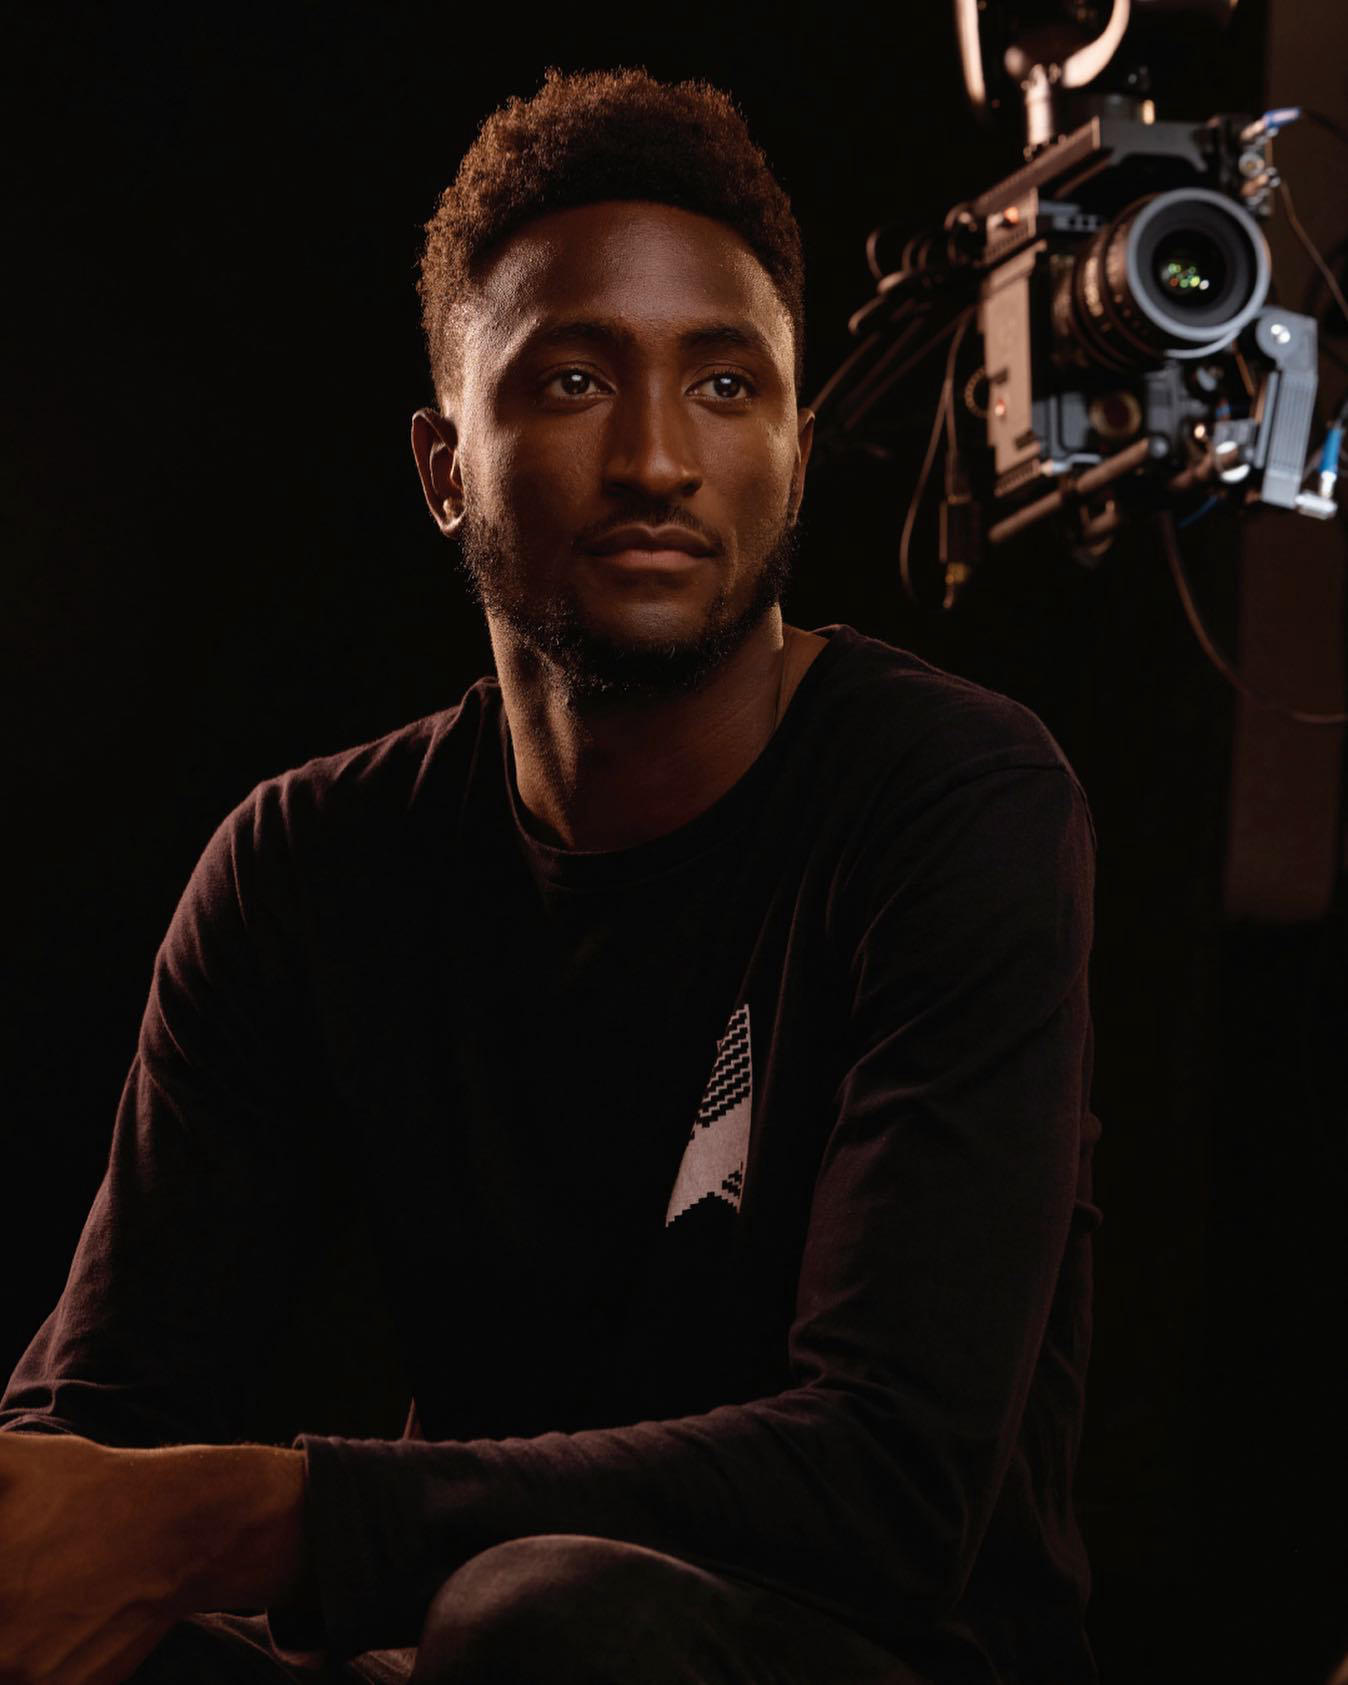 image  1 Marques Brownlee - 29 years old today, which means technically I’m starting my 30th orbit around the